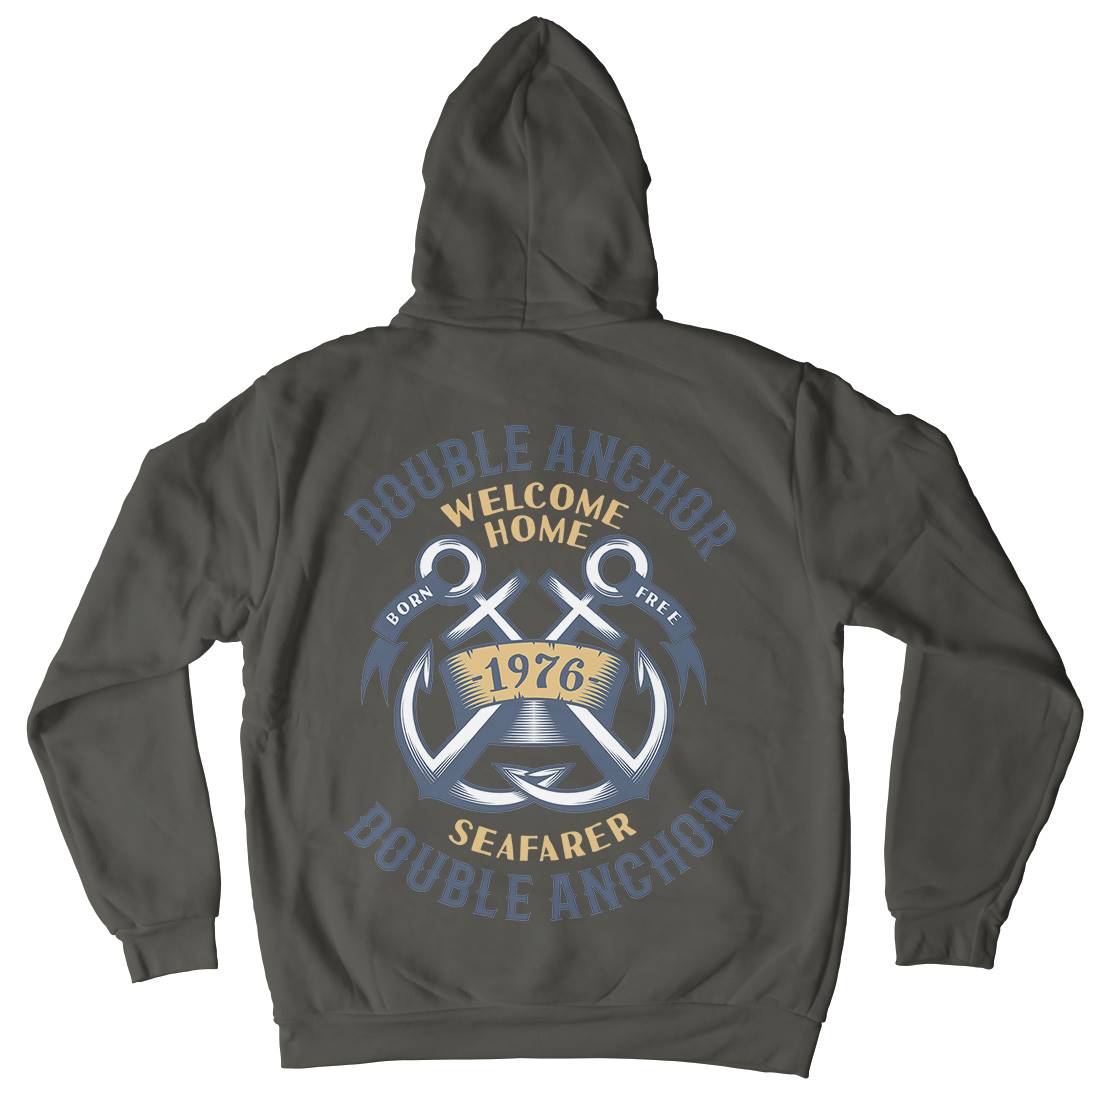 Double Anchor Mens Hoodie With Pocket Navy A400